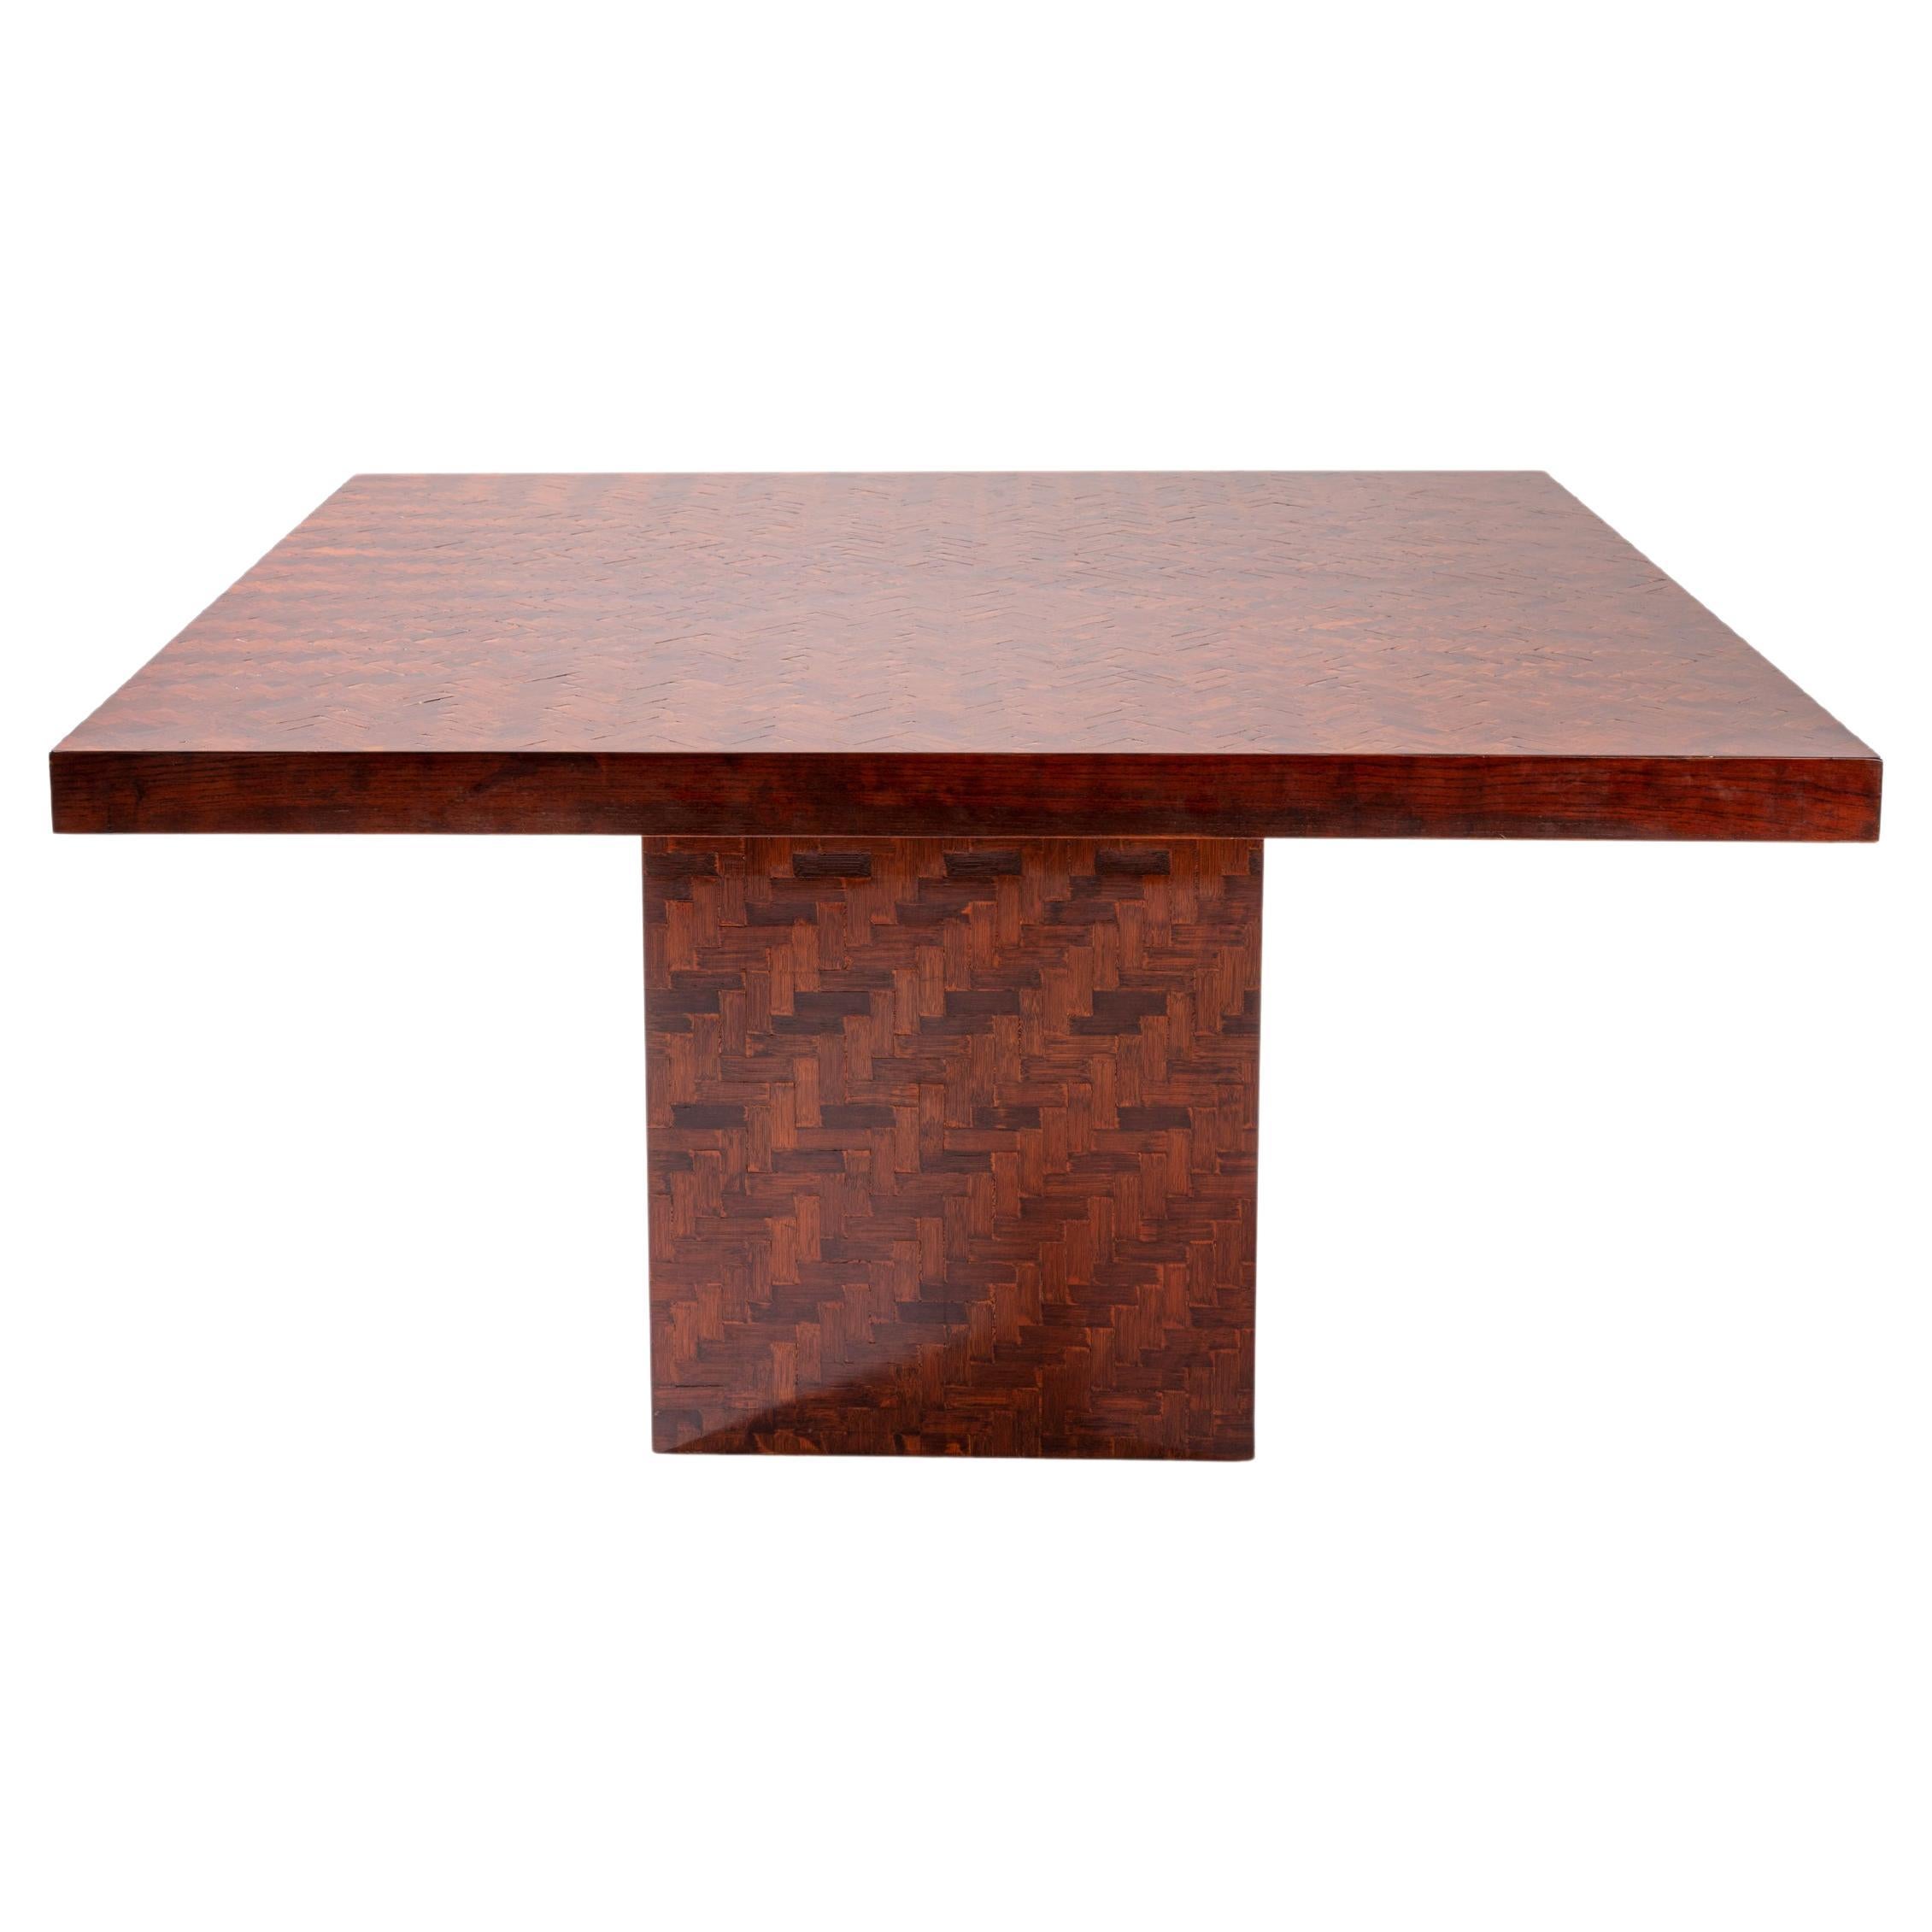 Square Dining Table for Turri with Dyed Banana Leaf Weaving ontop of Wood, 1970s For Sale